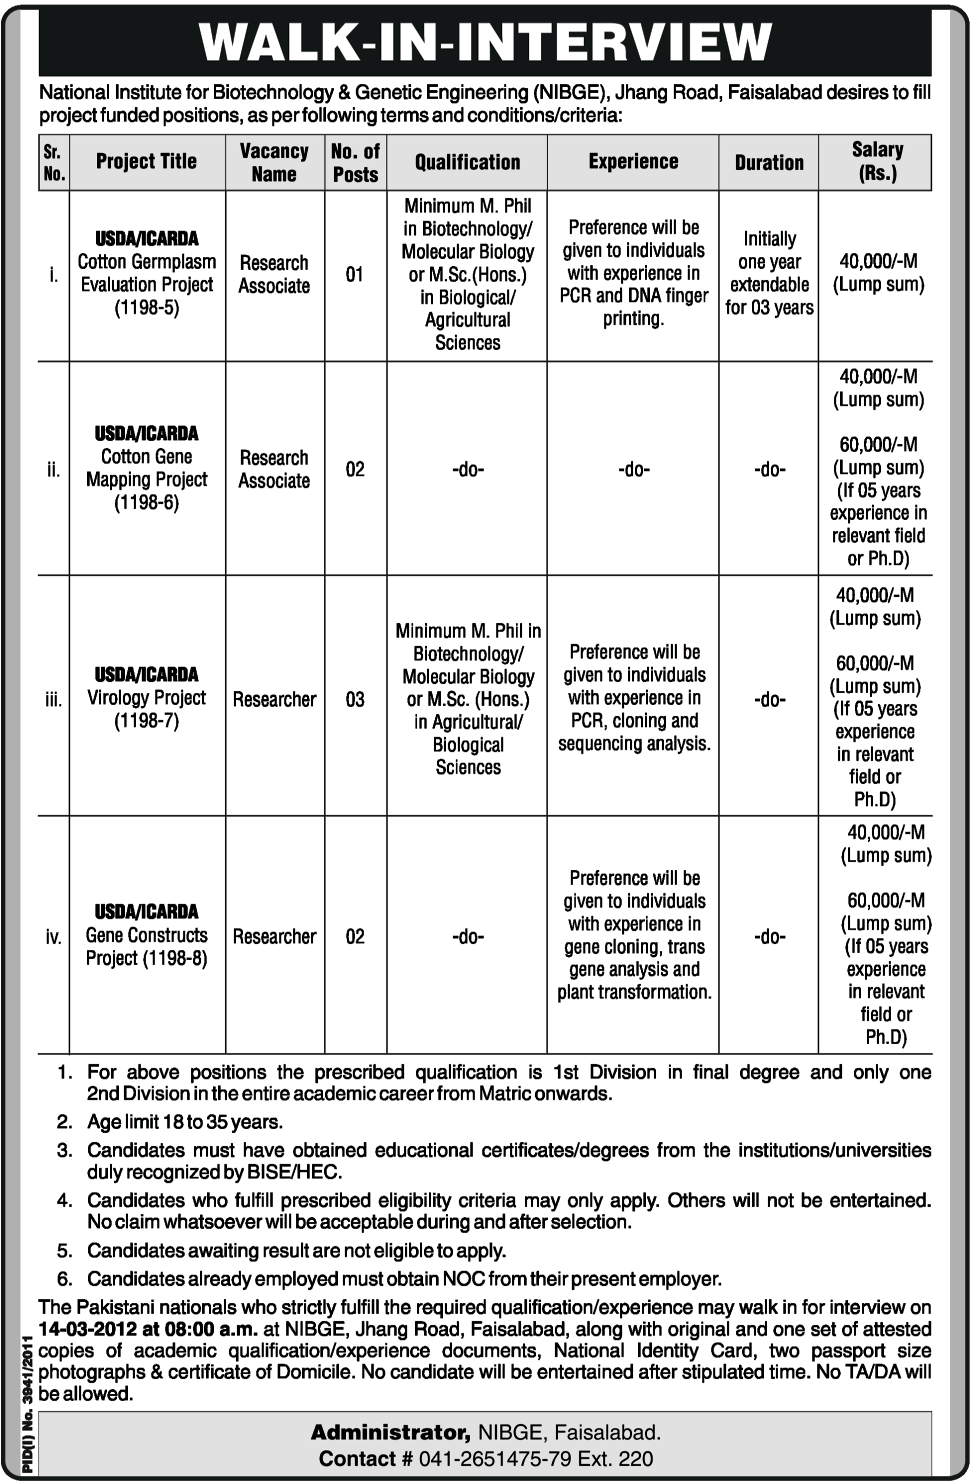 Jobs in national institute for biotechnology and genetic engineering